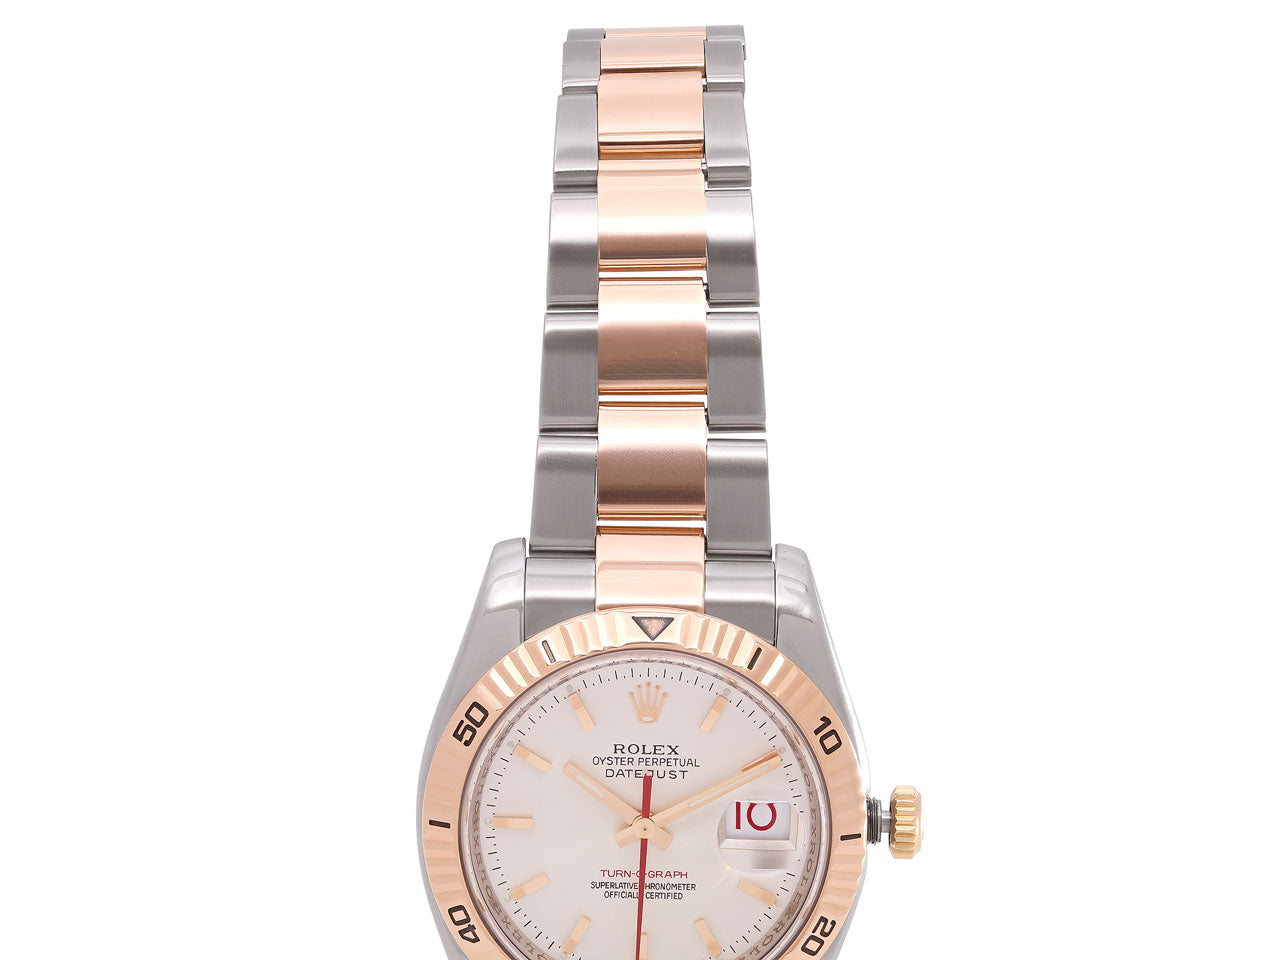 Rolex 'Turn-O-Graph' Datejust Watch in 18K Rose Gold and Stainless Steel, 36 mm